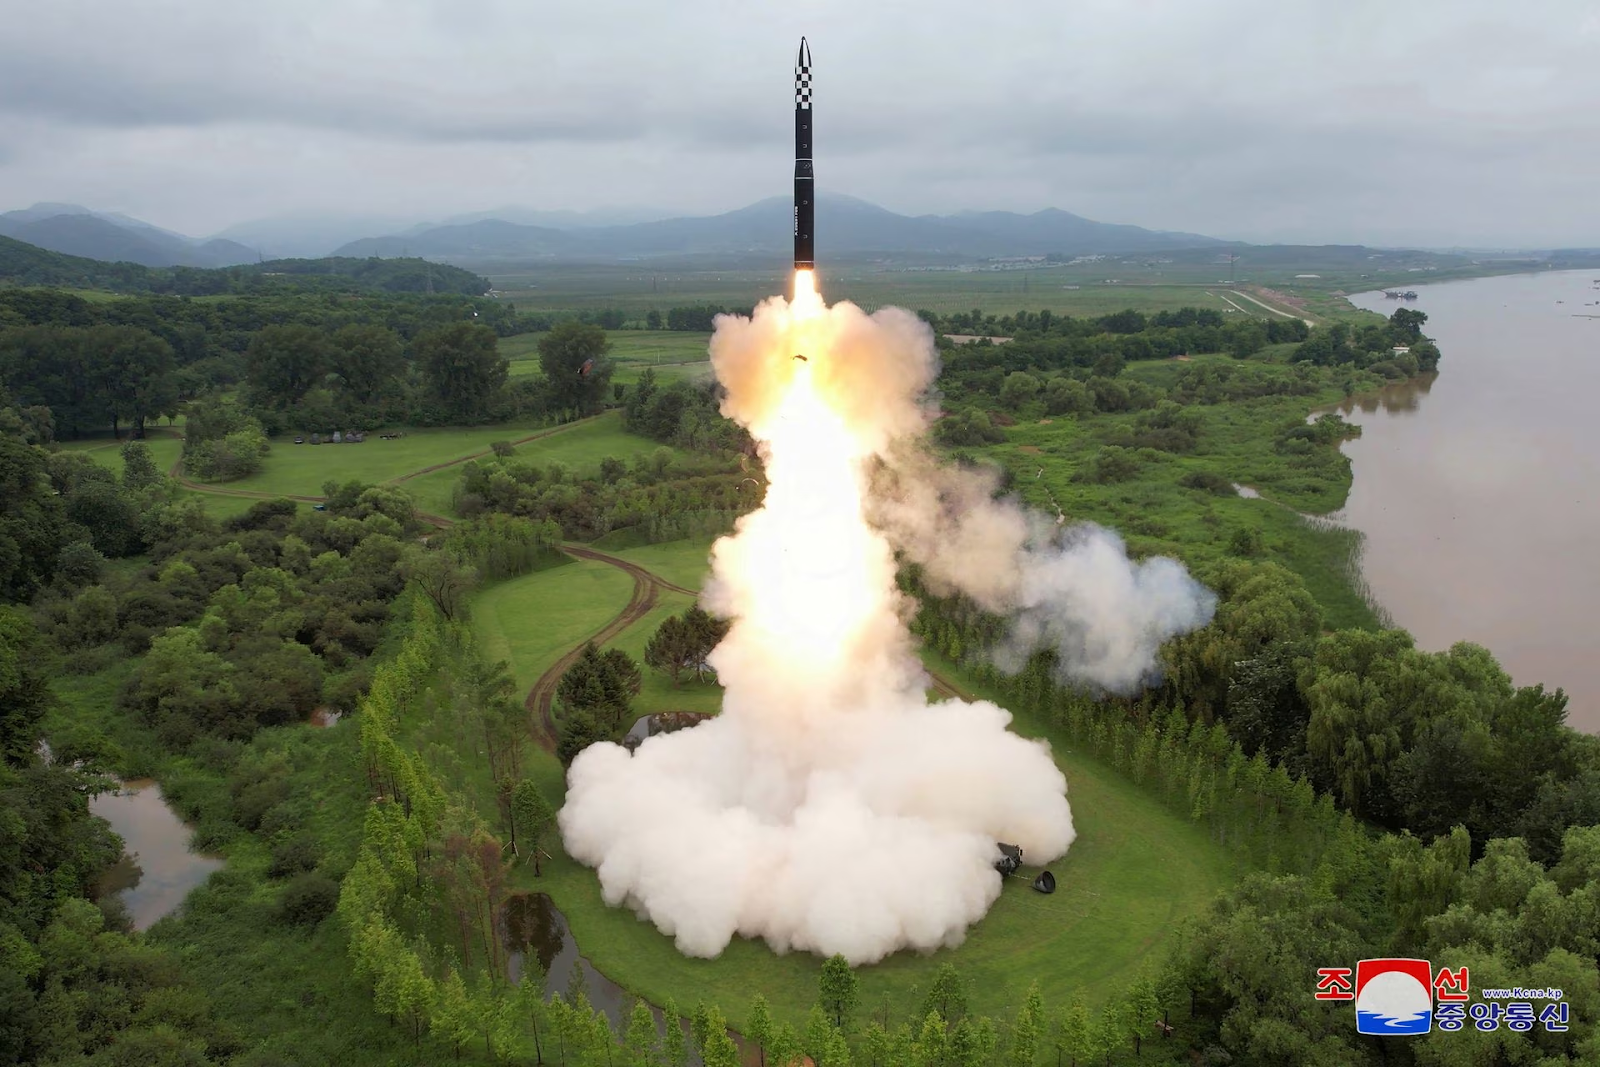 North Korea Tests Ballistic Missiles in Sea of Japan - Asiana Times